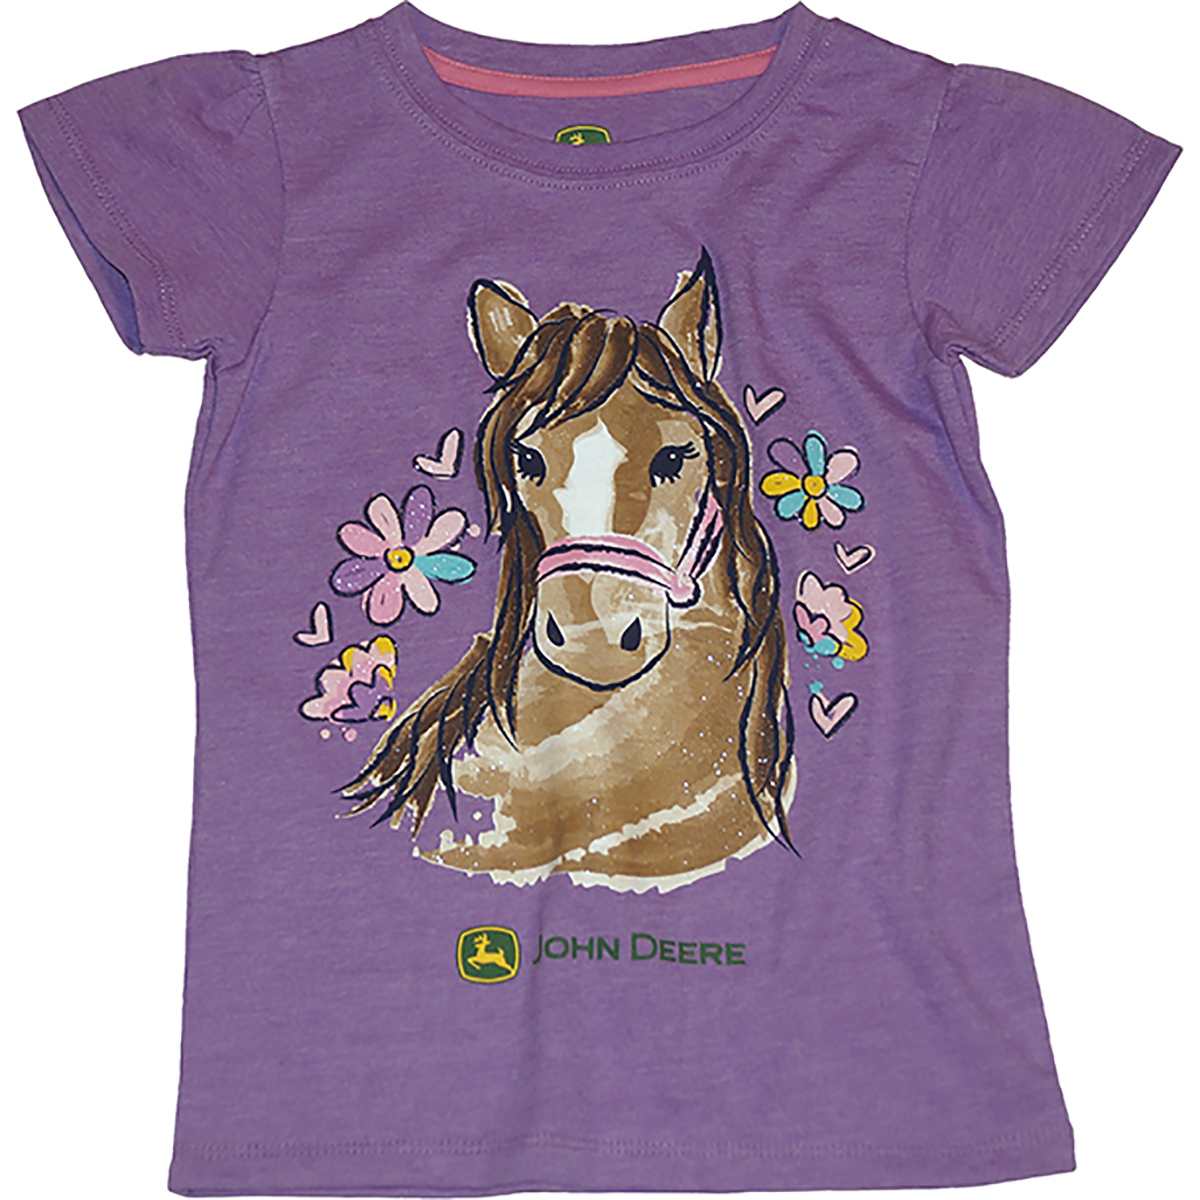 Water Color Horse Tee